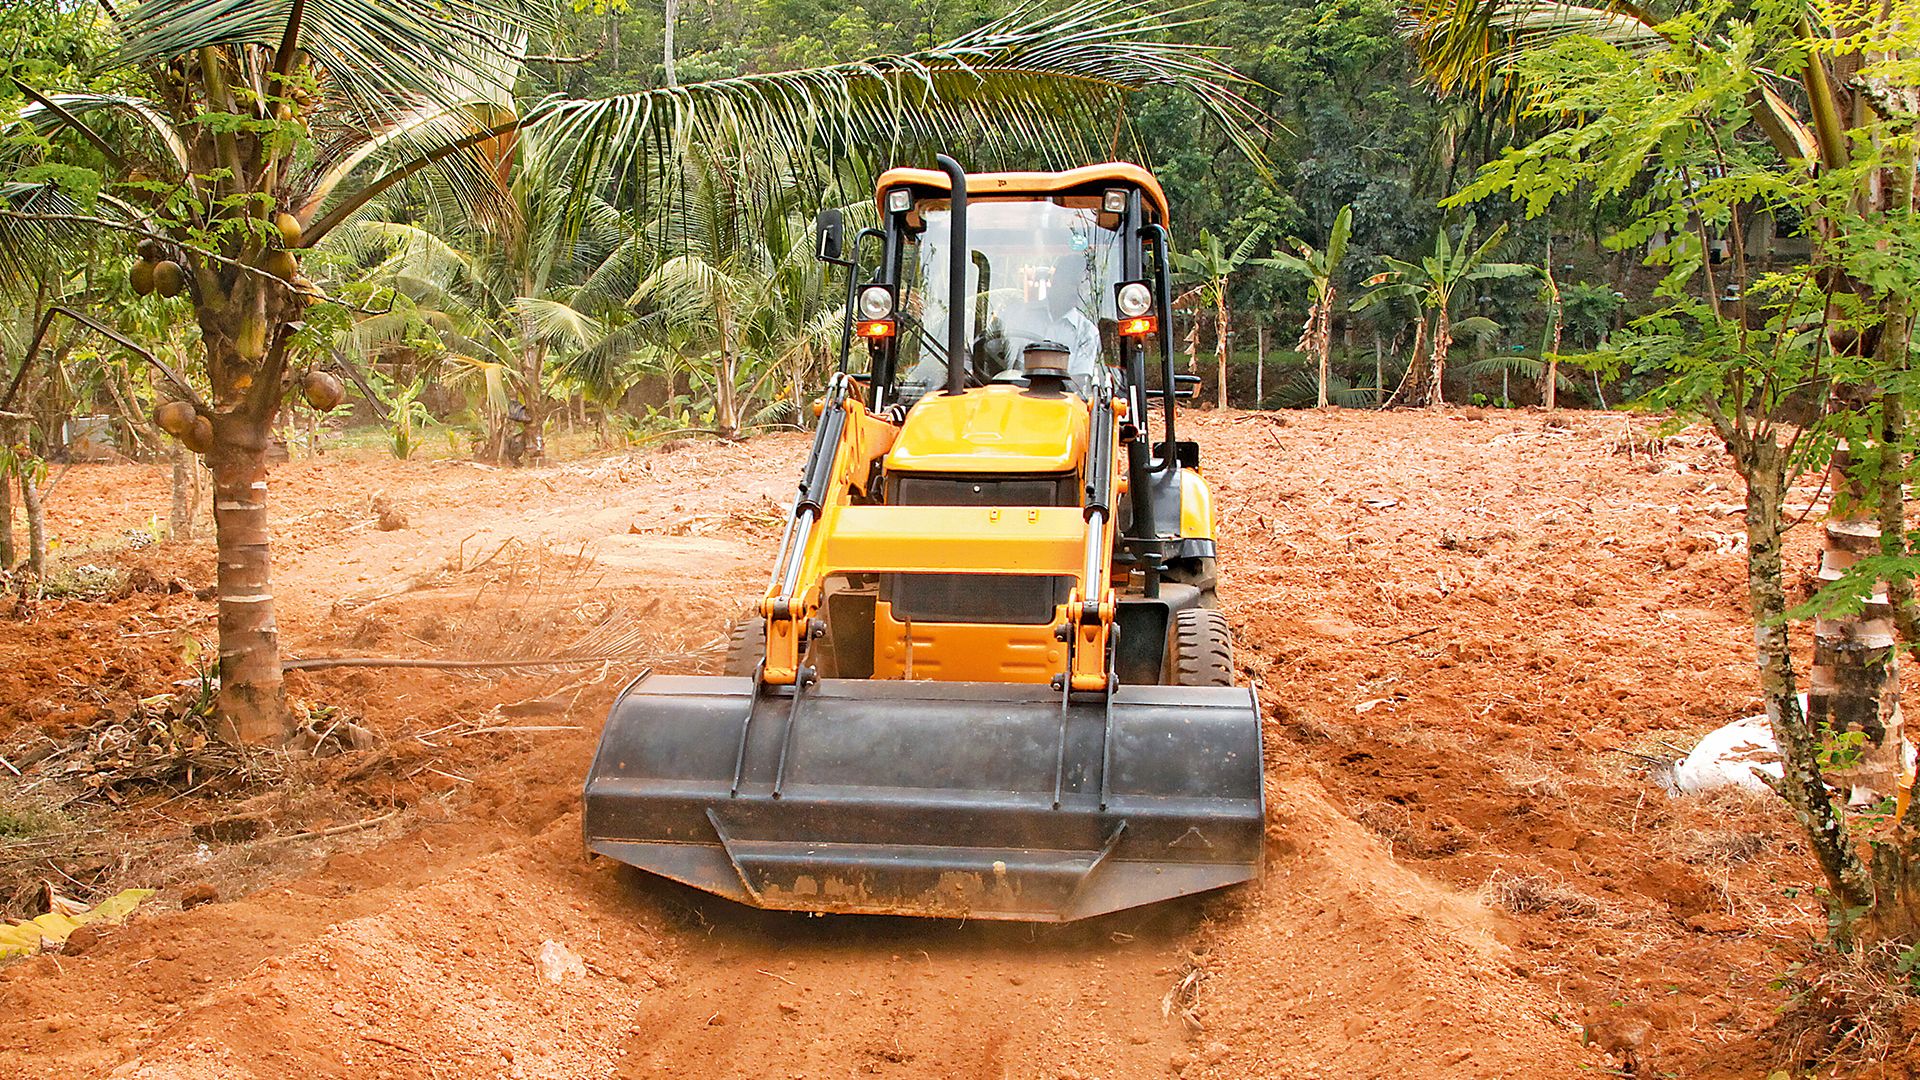 JCB Image, Photo and Wallpaper India Product Image